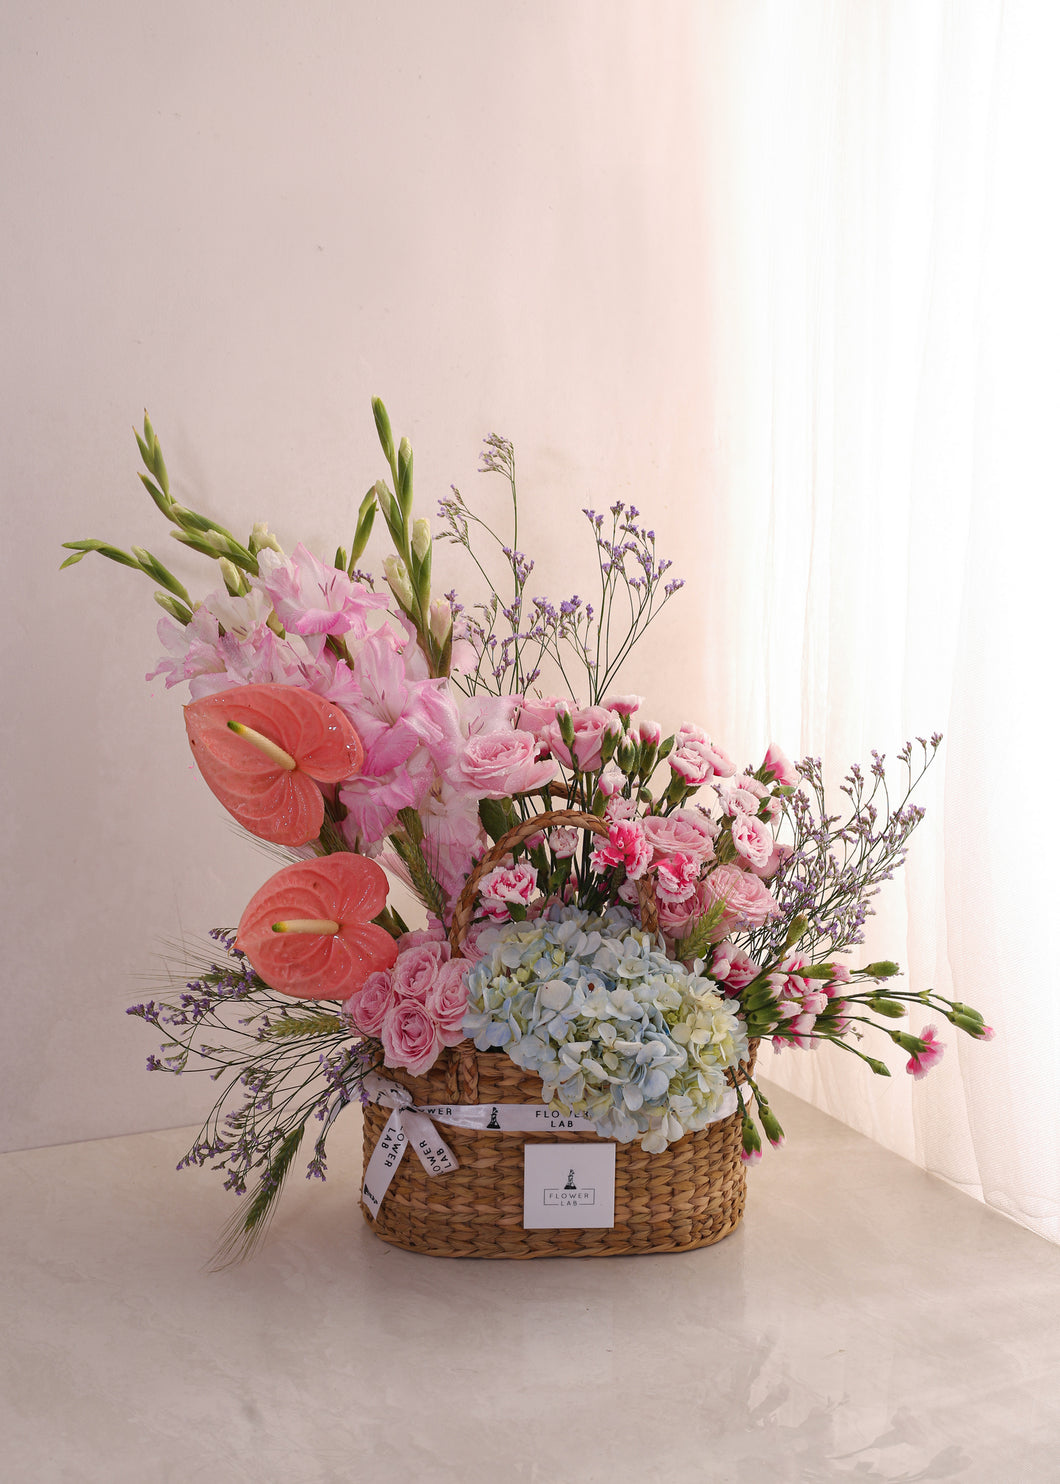 Pastel Prettiness in cane basket